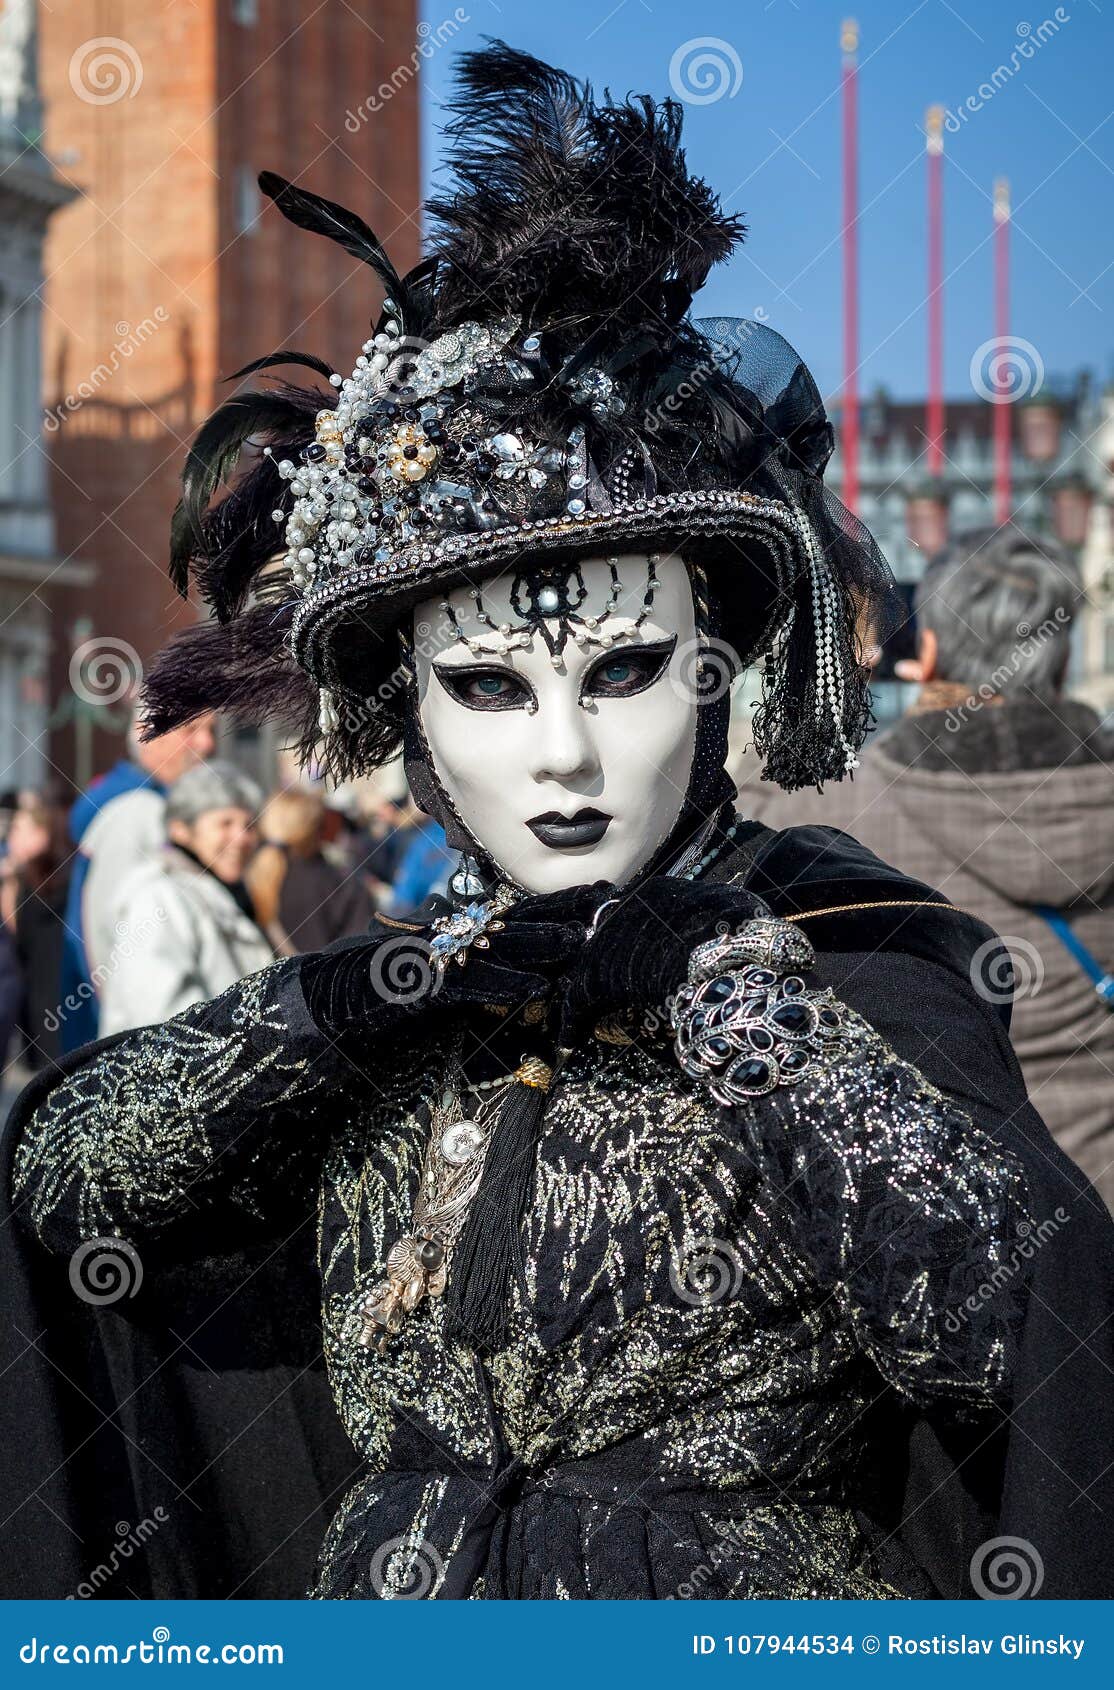 Portrait of Woman Wearing Black Costume and White Mask on Venetian ...